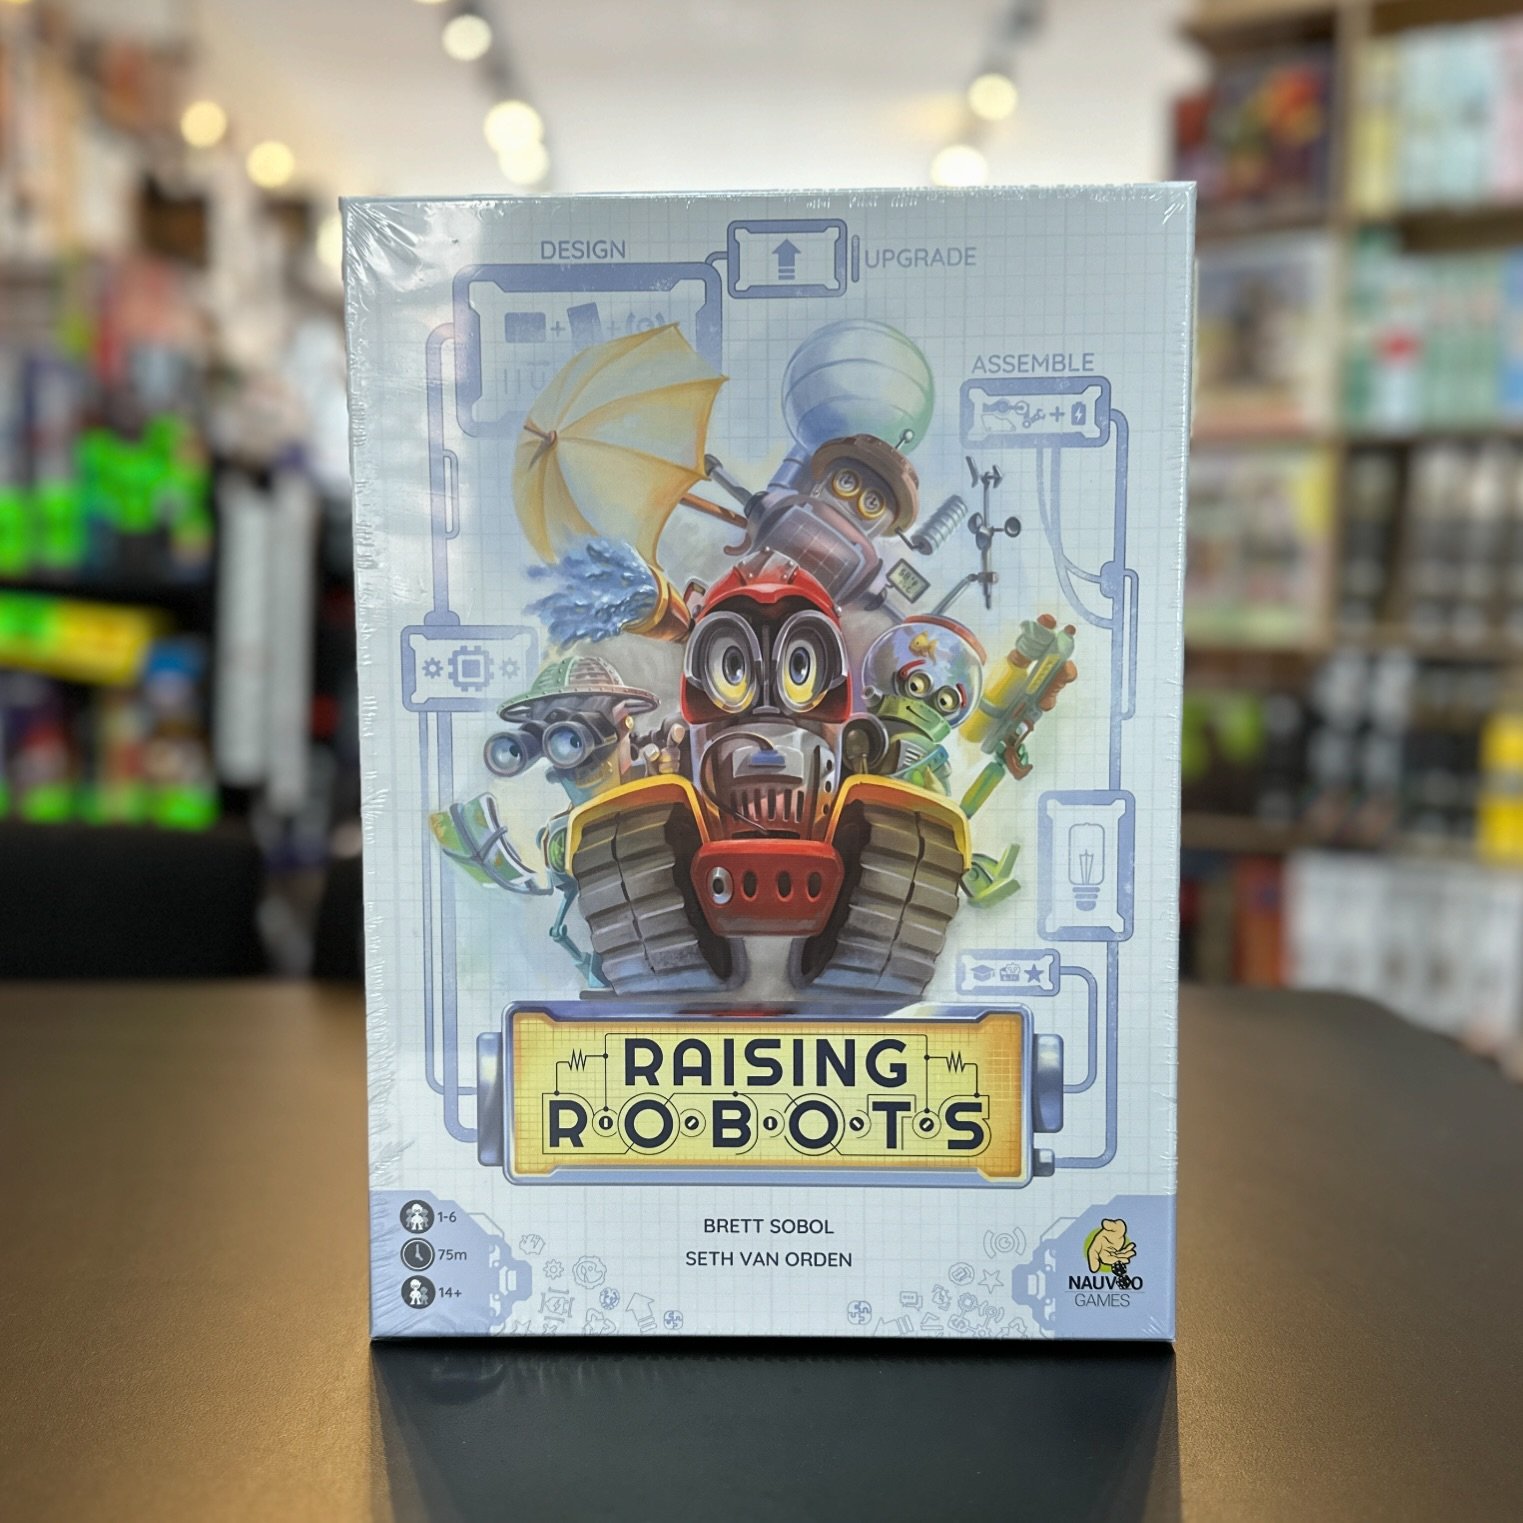 We&rsquo;ve got more new games in stock this week!  In Raising Robots, you&rsquo;re a famous inventor trying to assemble the greatest collection of robots 🤖 Assemble, upgrade, design, fabricate, or recycle your way to victory but be careful, the mos